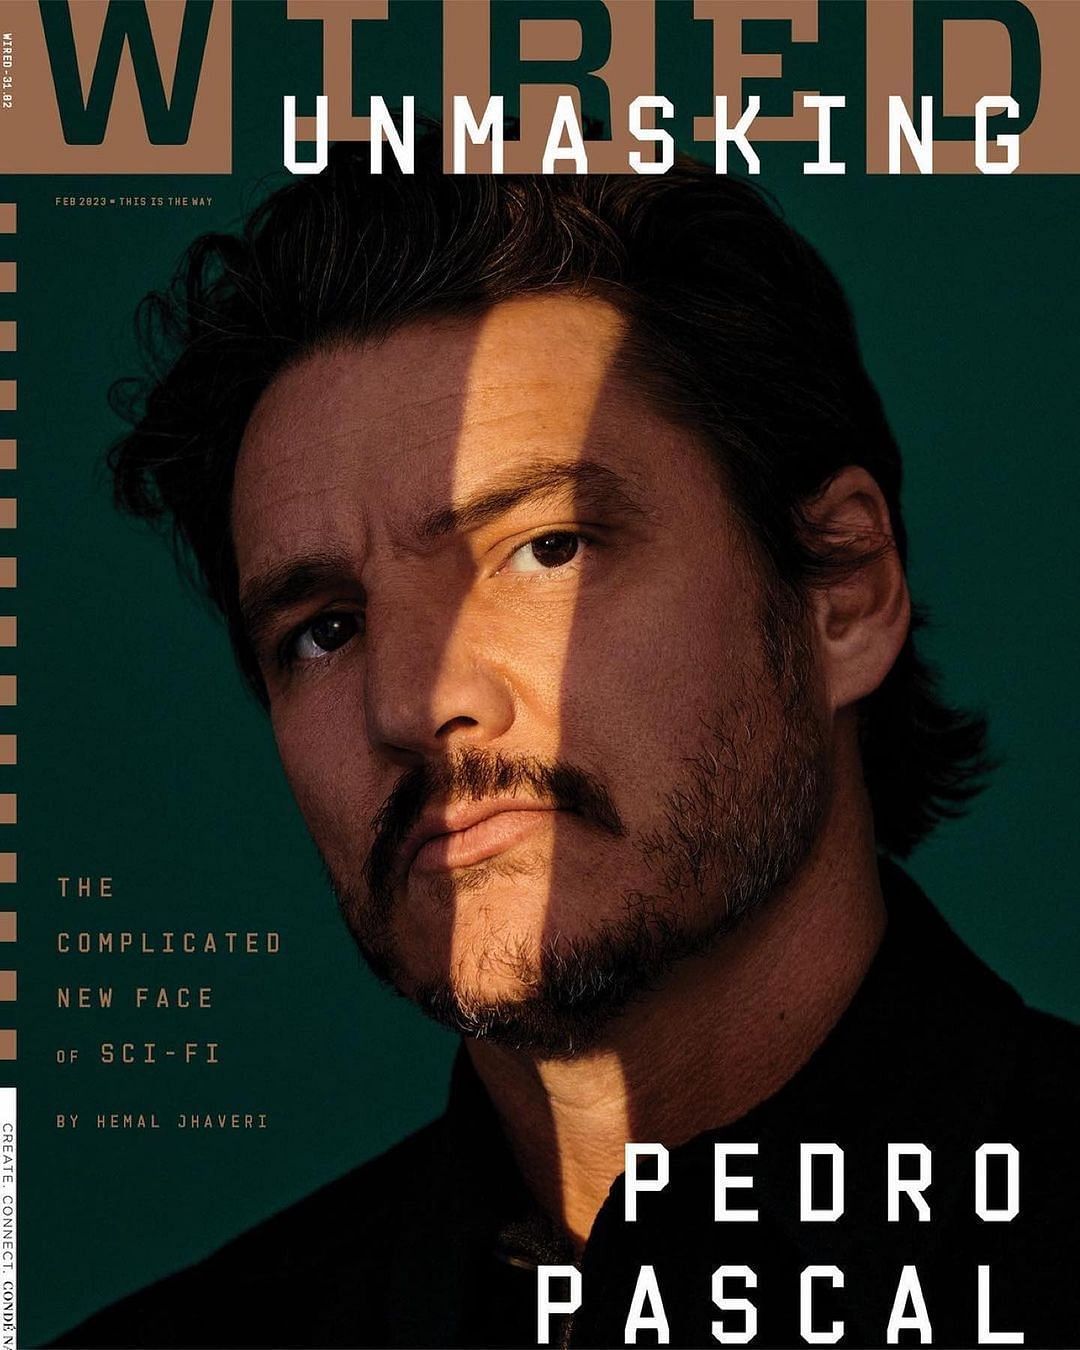 Pedro Pascal&#039;s Movies And TV Shows